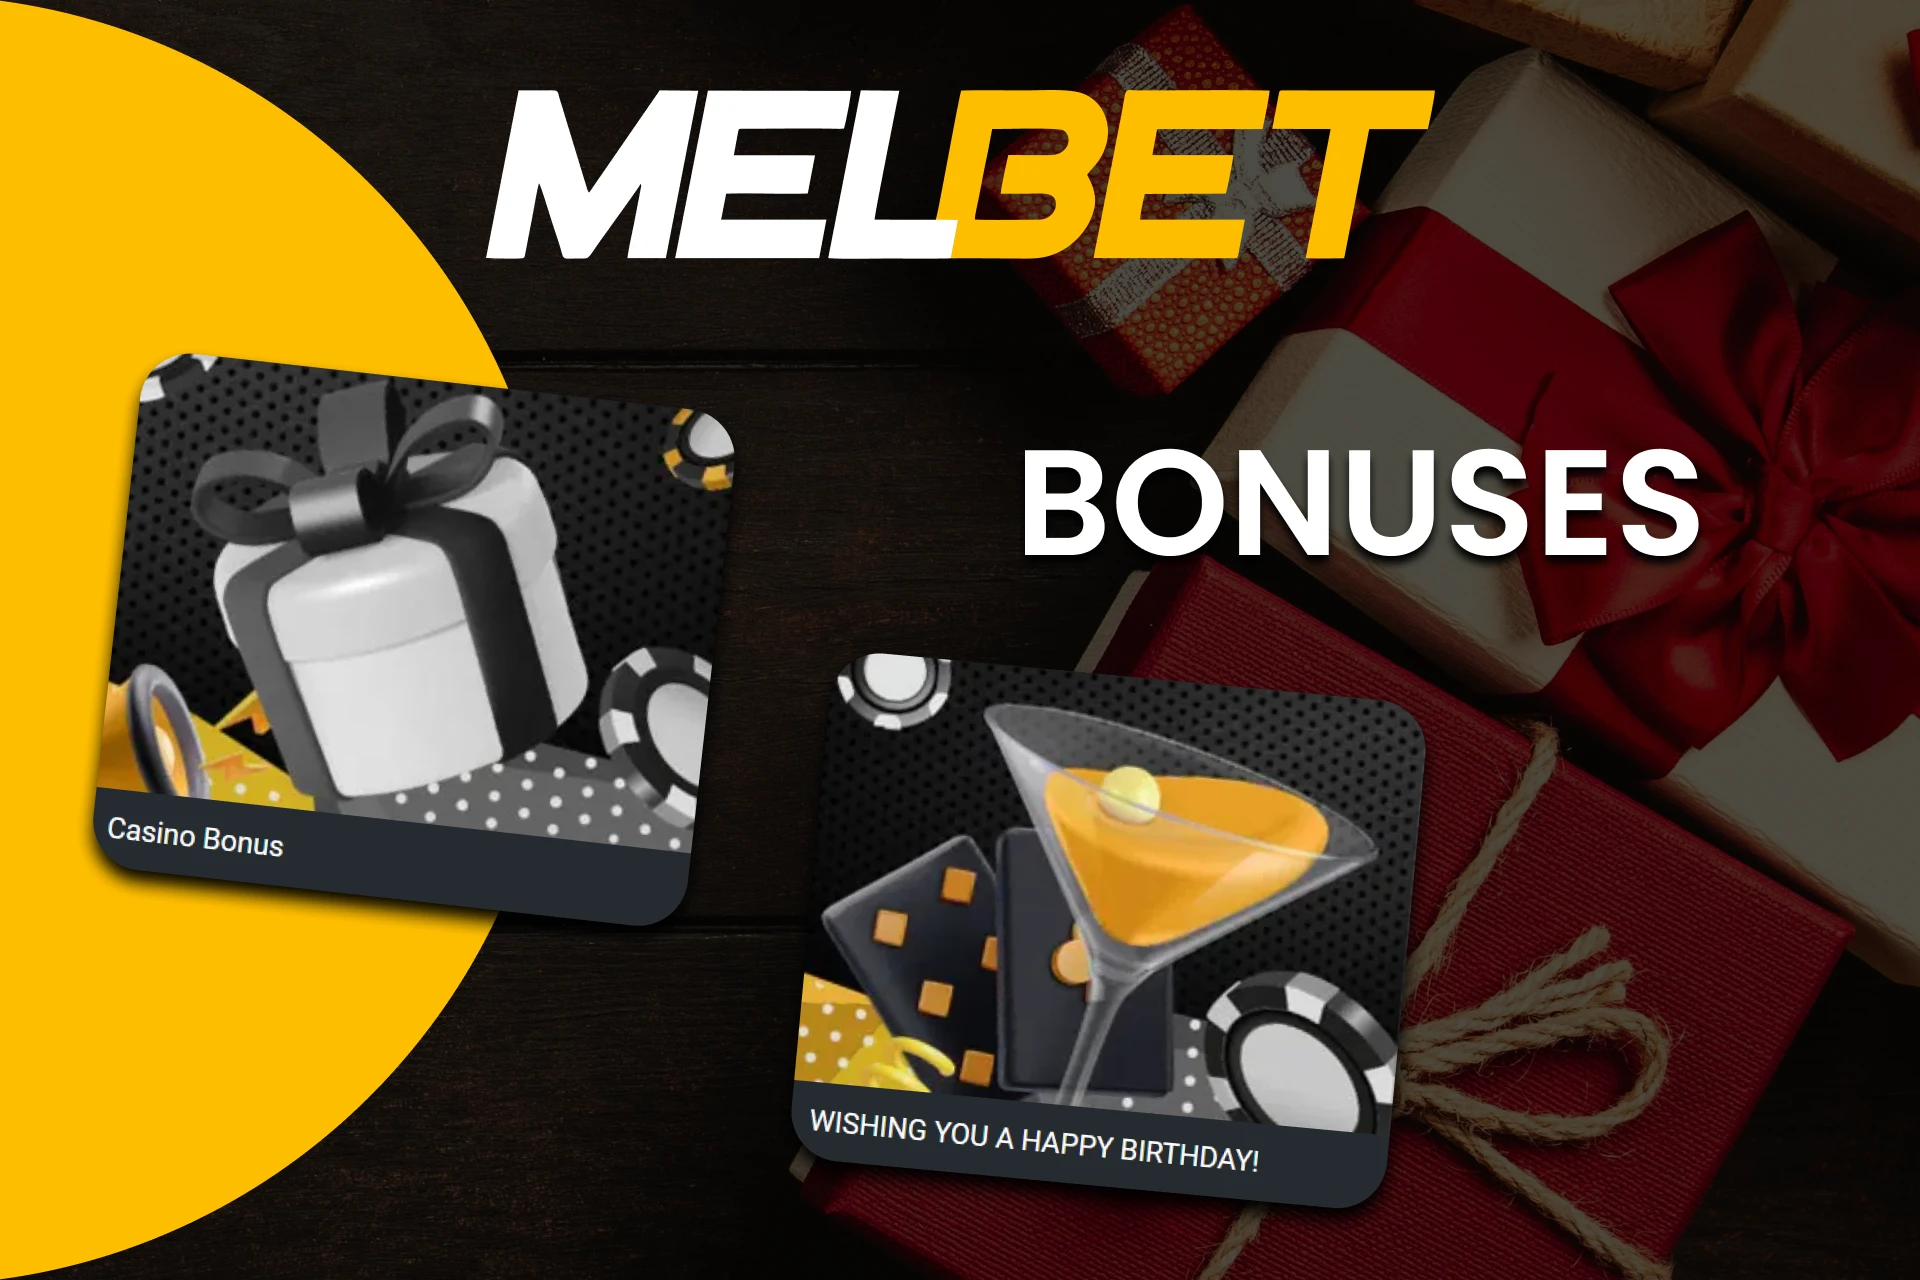 Melbet gives bonuses for gaming to Bingo.